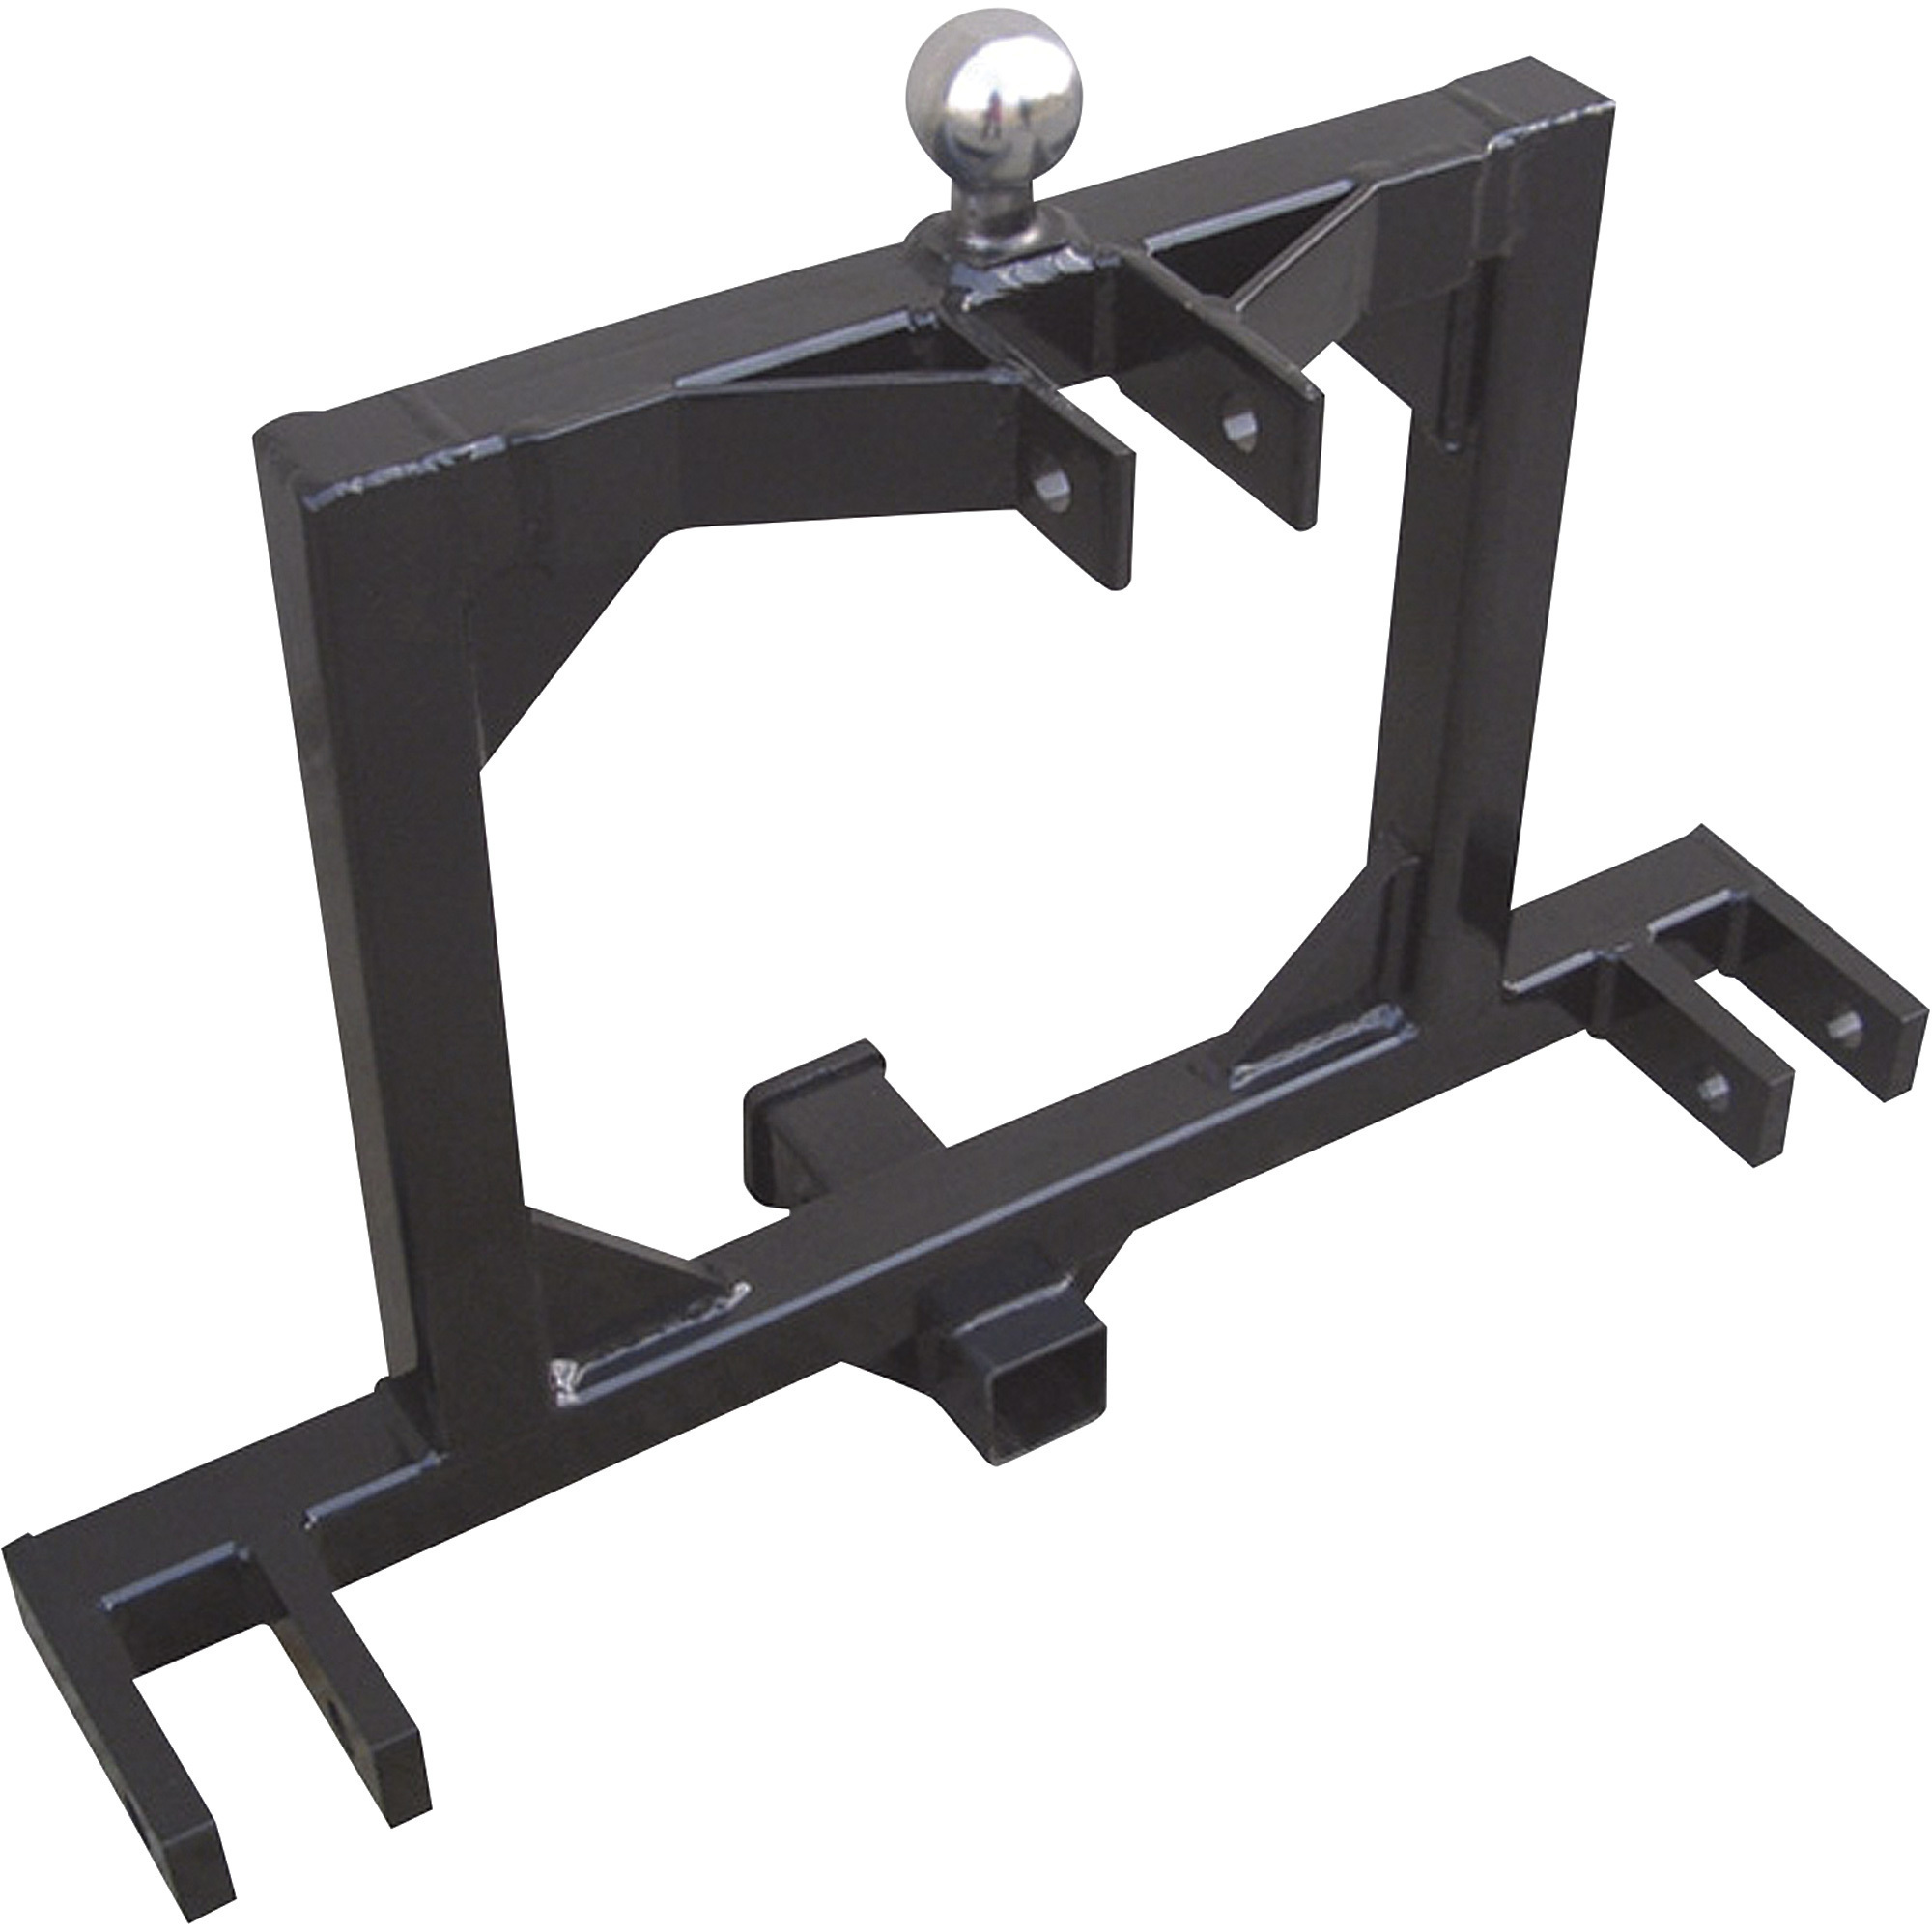 Category 1, 3-Pt. Hitch to 2Inch Receiver Adapter